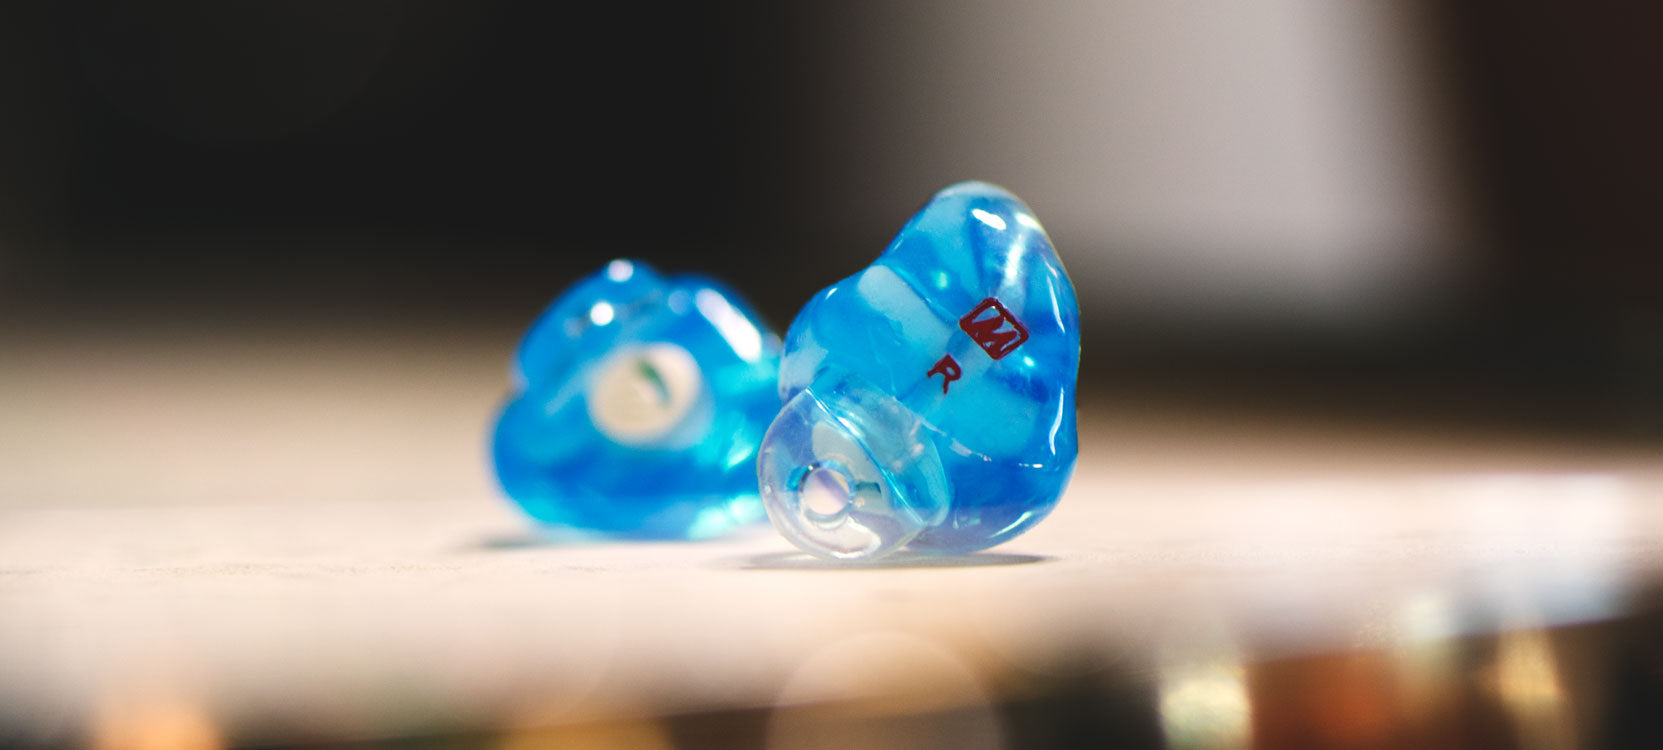 A pair of custom-molded blue earplugs marked with "r" for right on a wooden surface, emphasizing their unique shape and vibrant color.